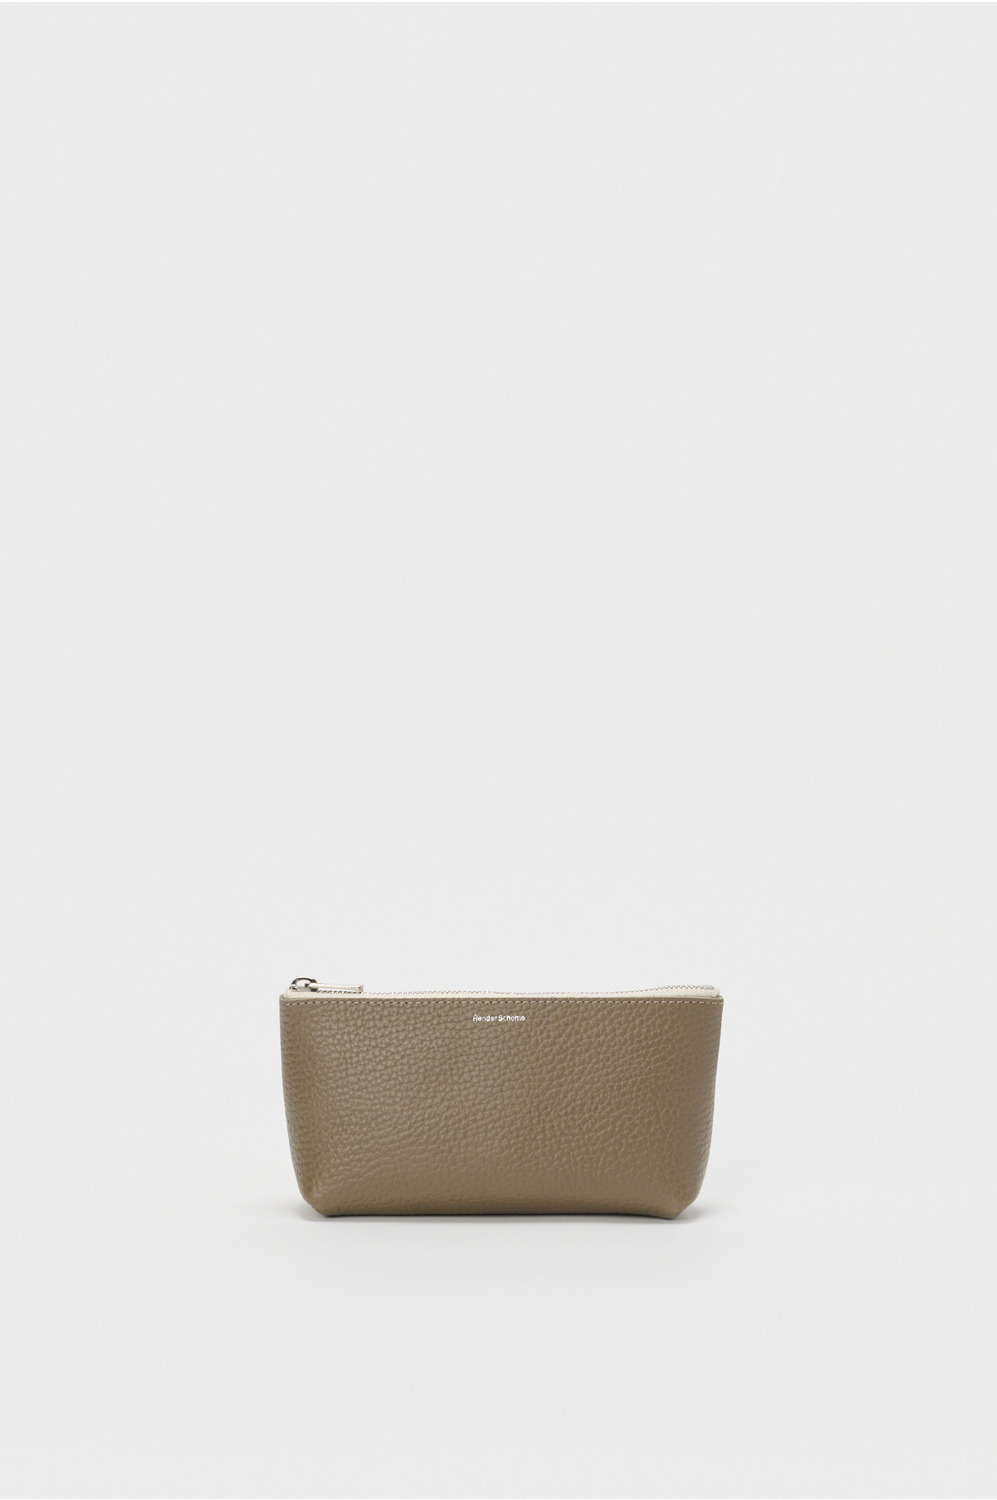 pouch S 詳細画像 taupe 1